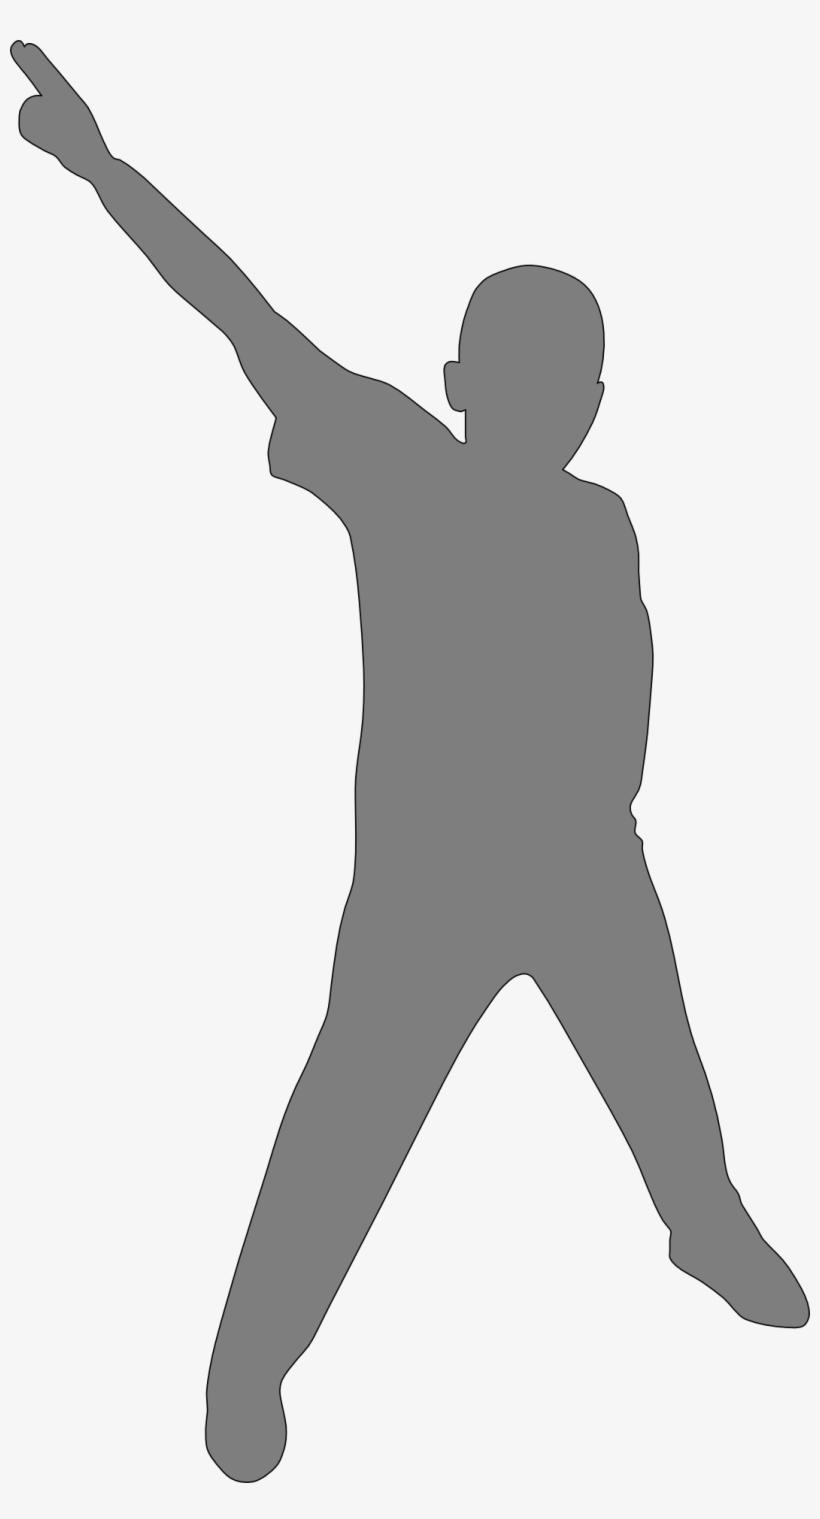 Man Pointing Finger Upward - Black Pointing Silhouette, transparent png #2863604